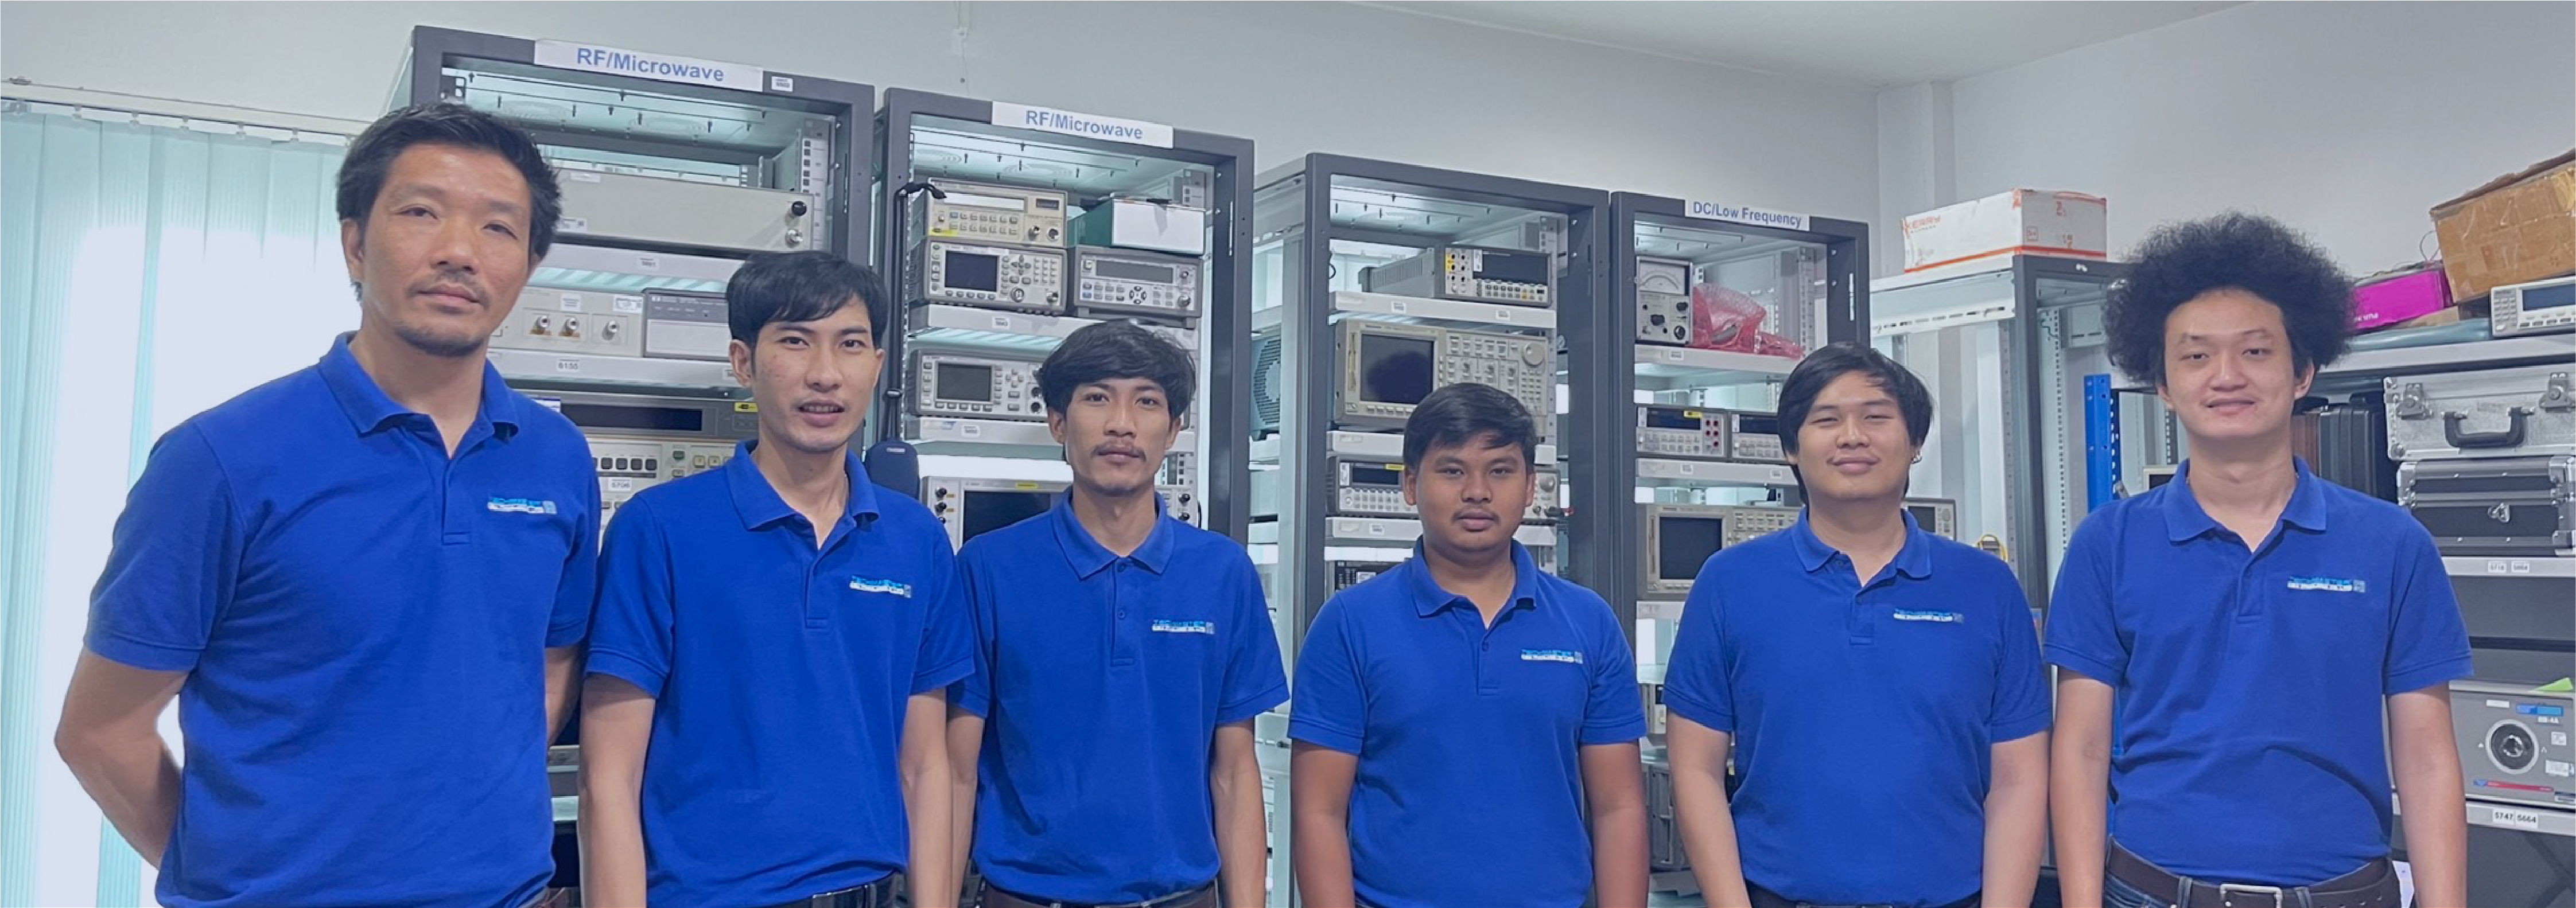 About Techmaster Thailand Division